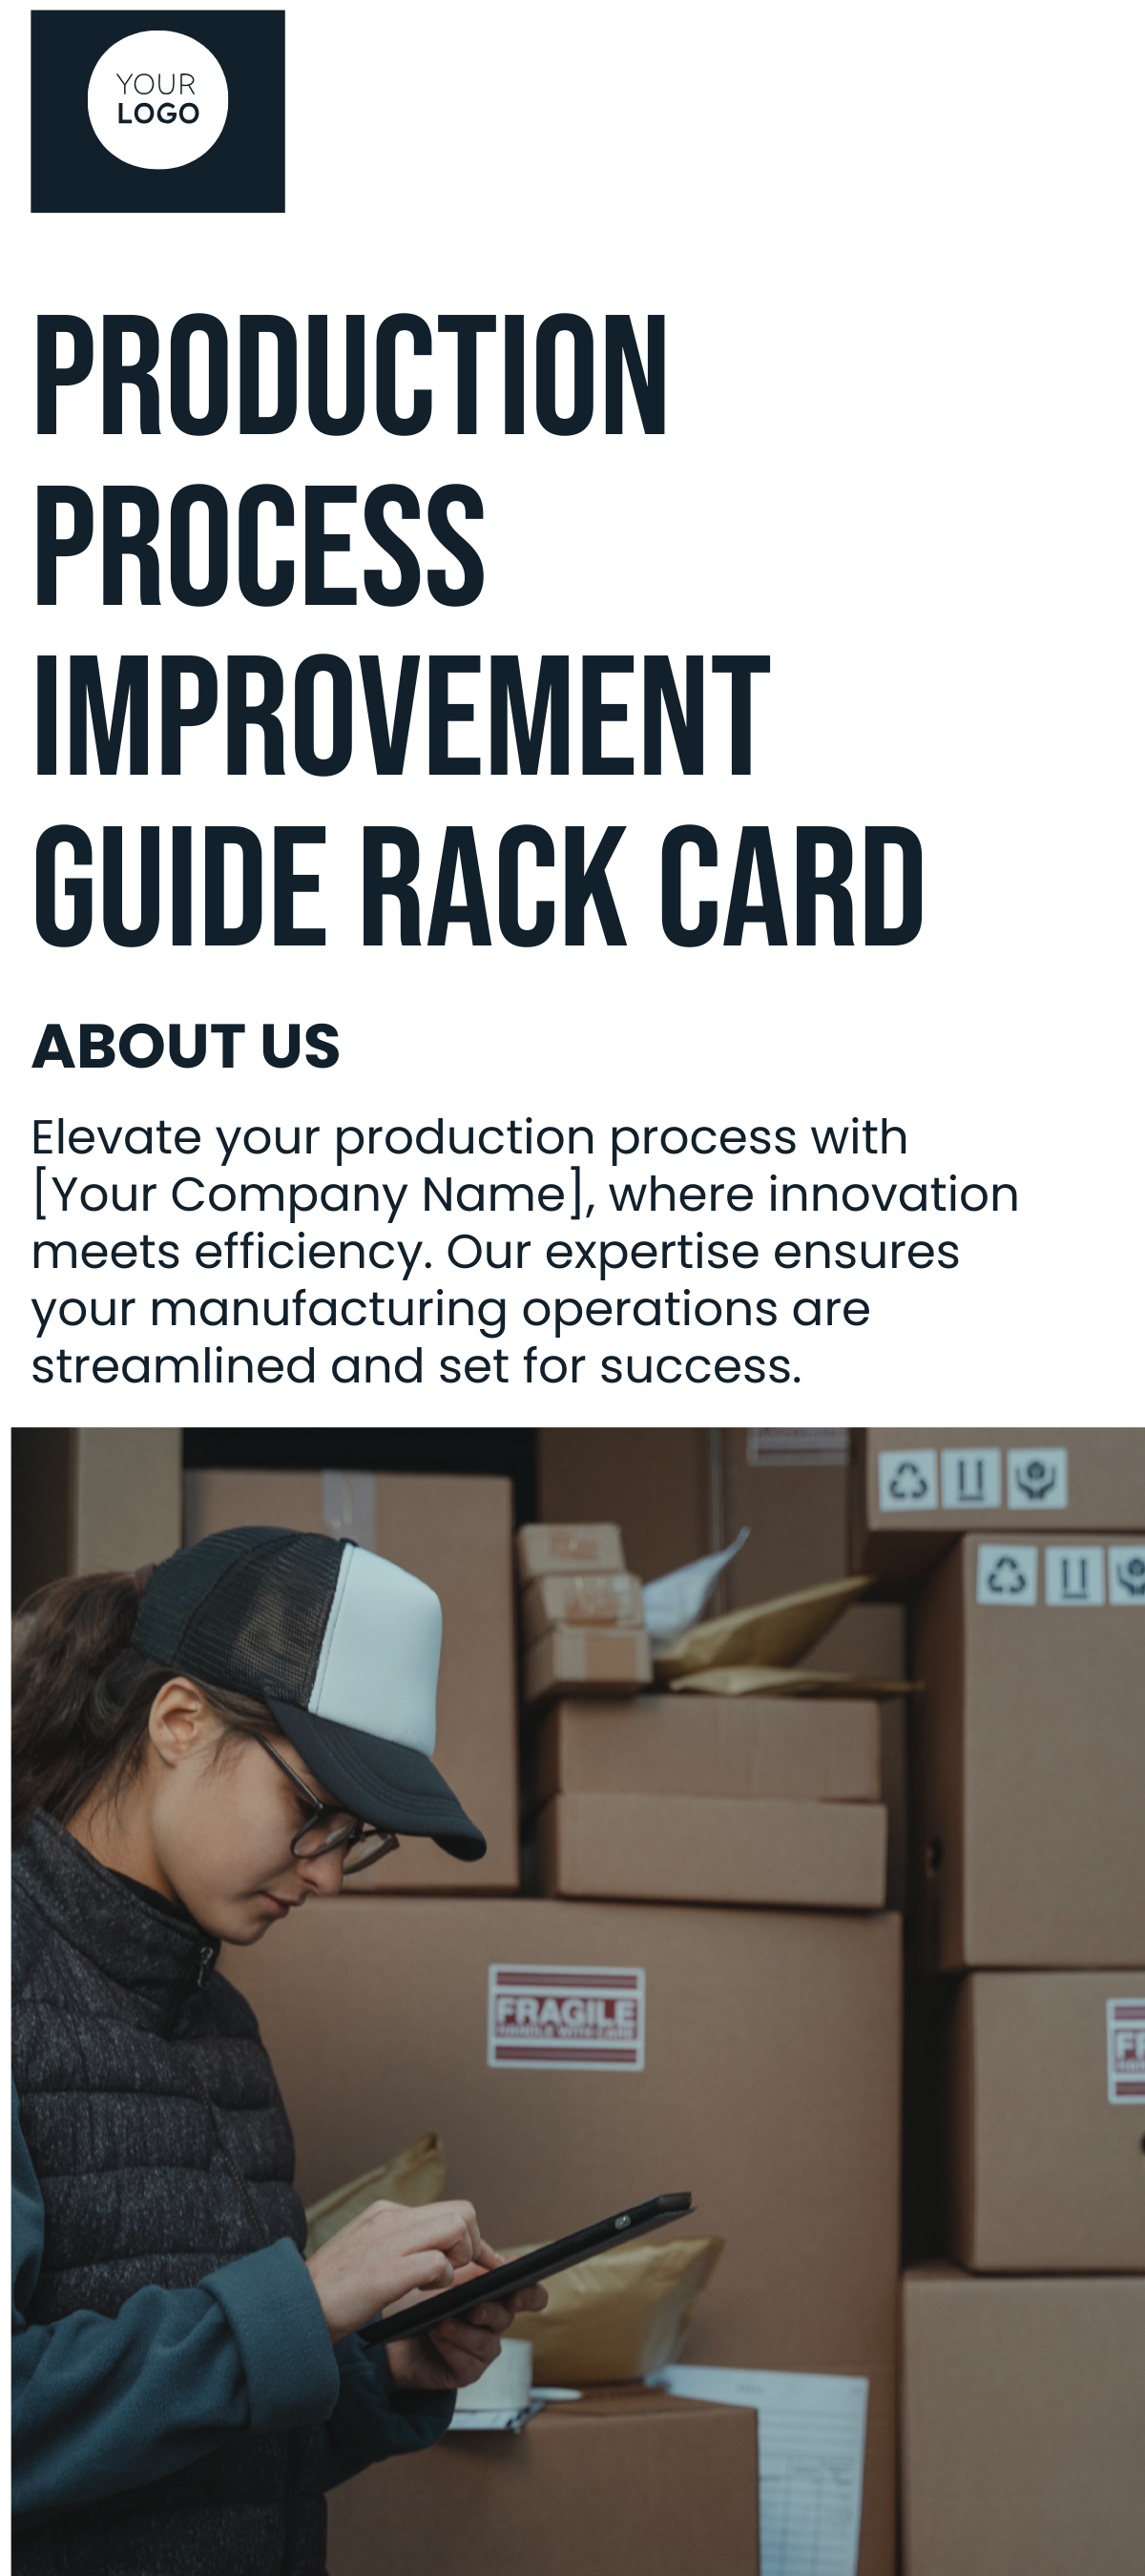 Production Process Improvement Guide Rack Card Template